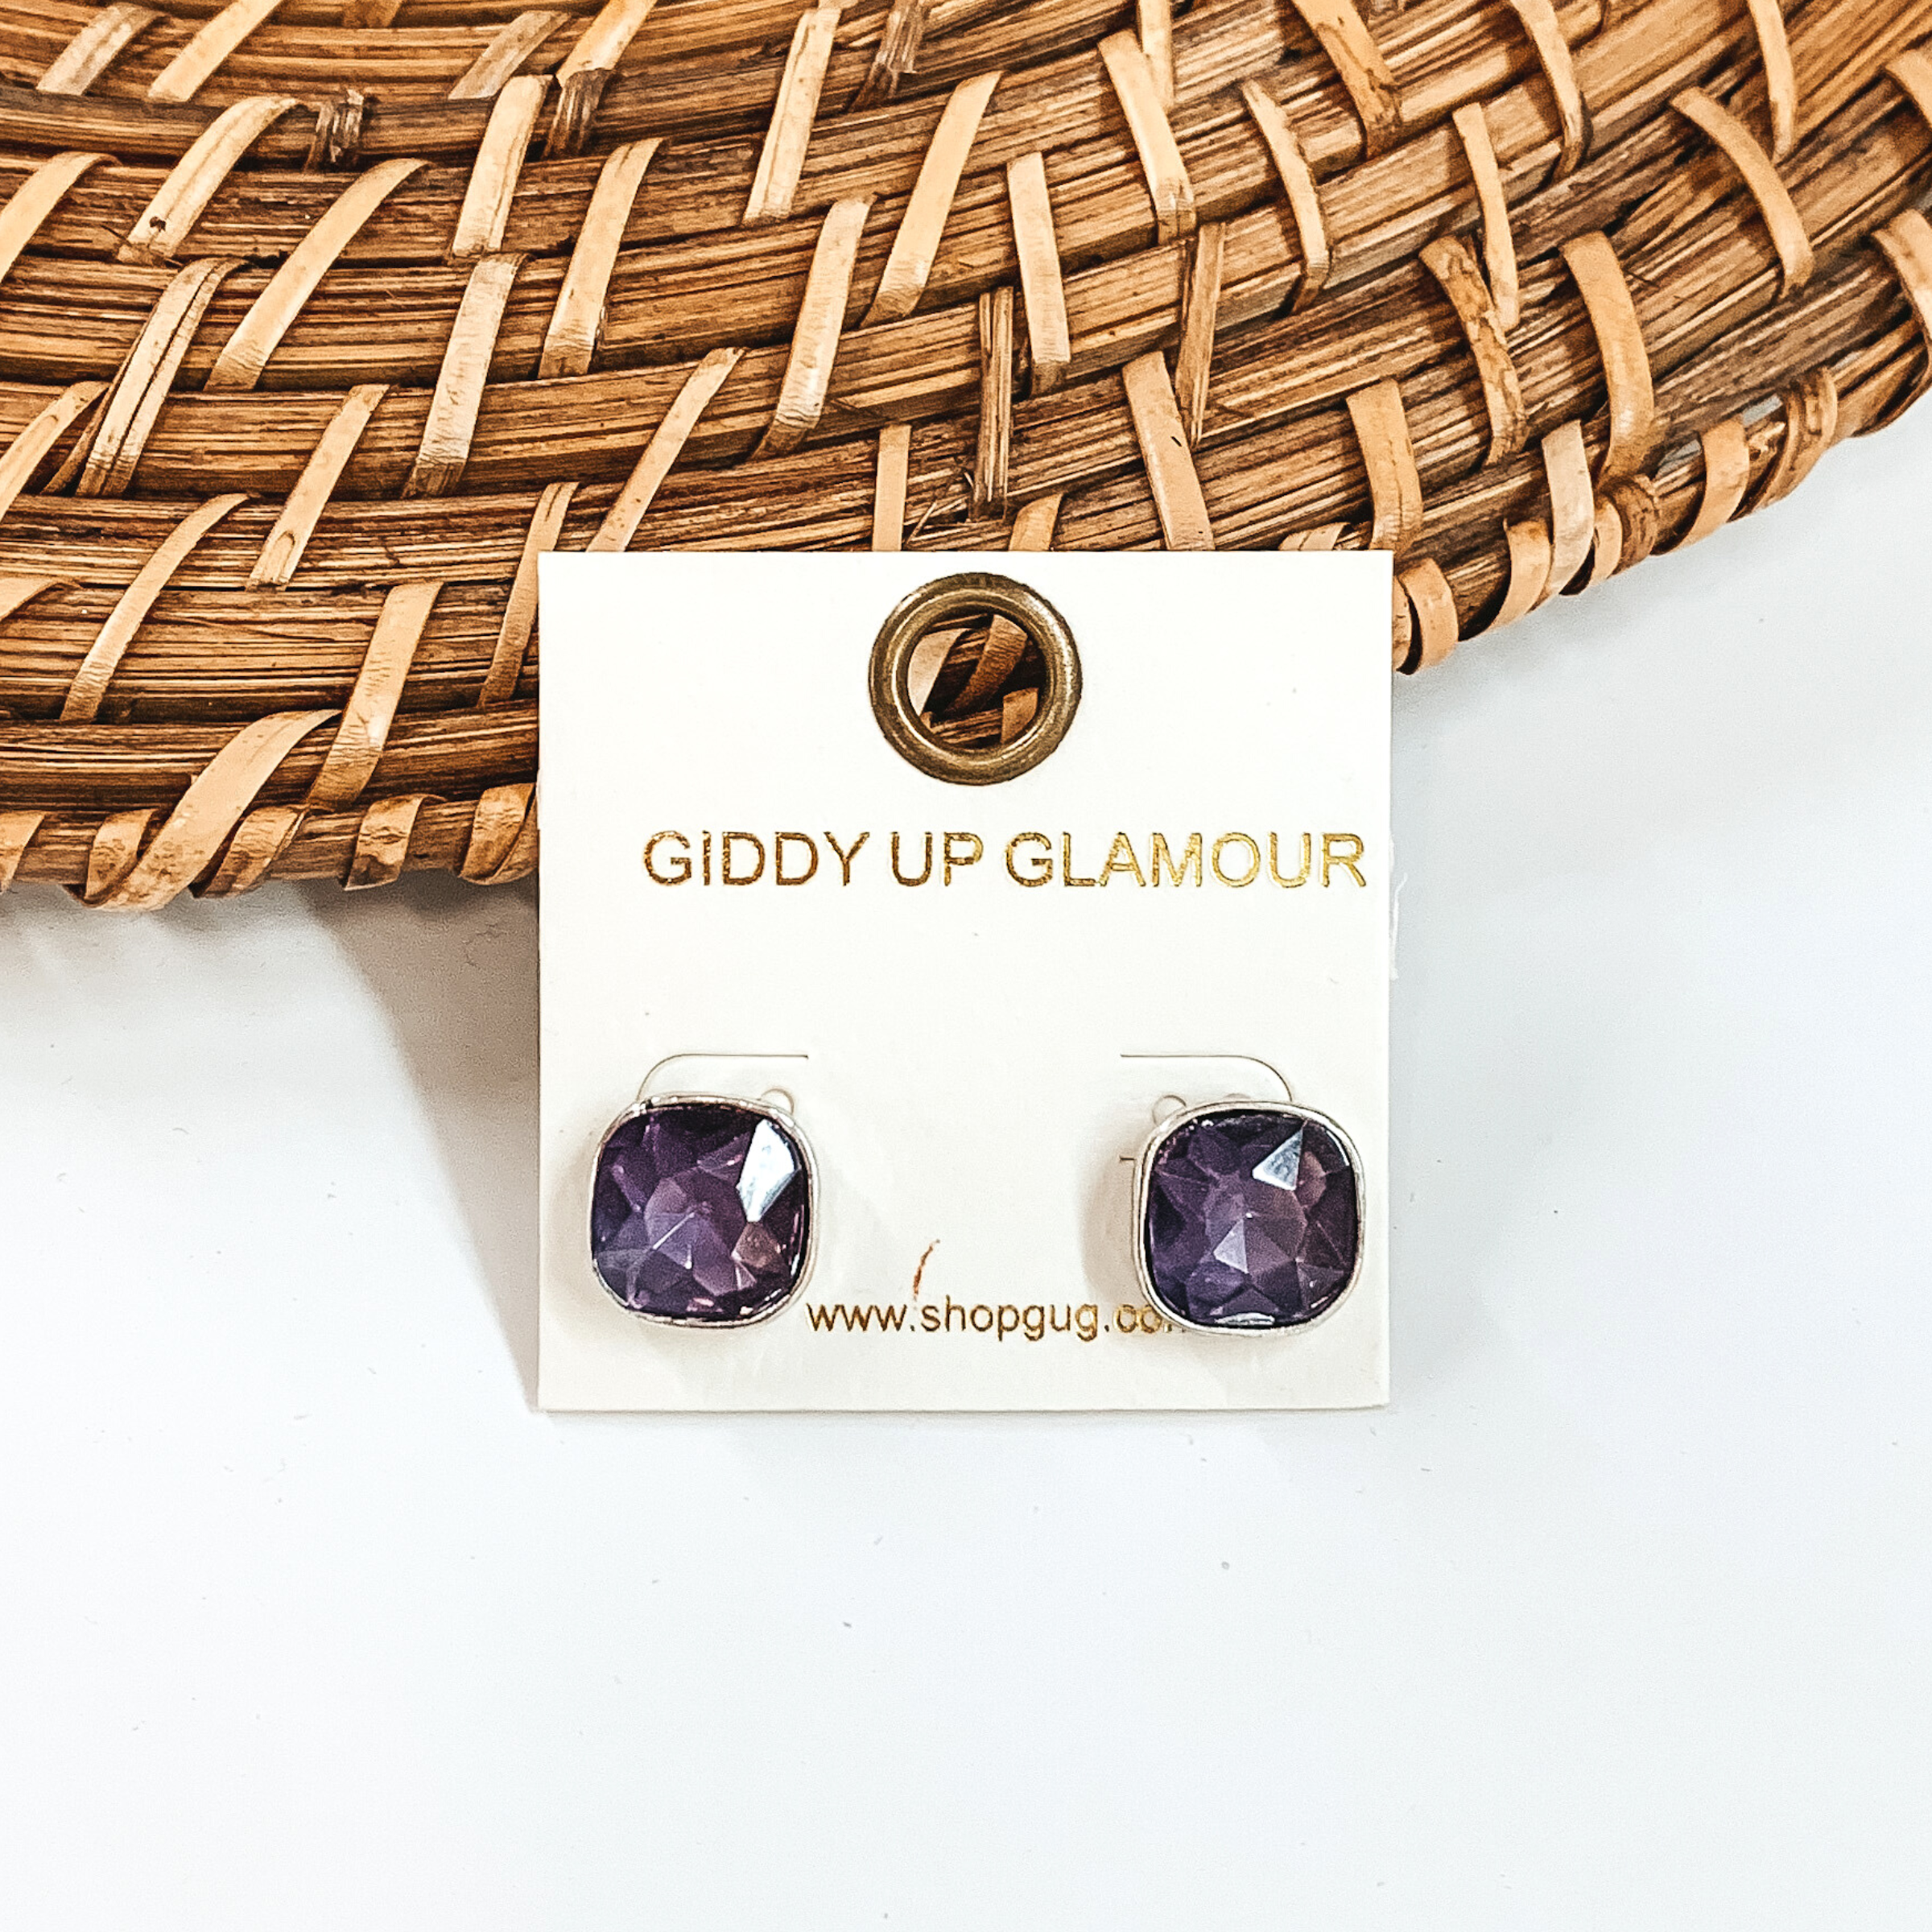 Silver, square stud earrings with purple colored crystals. These earrings are pictured on a white GUG earrings holder on a white background with brown basket weave material behind the earrings. 